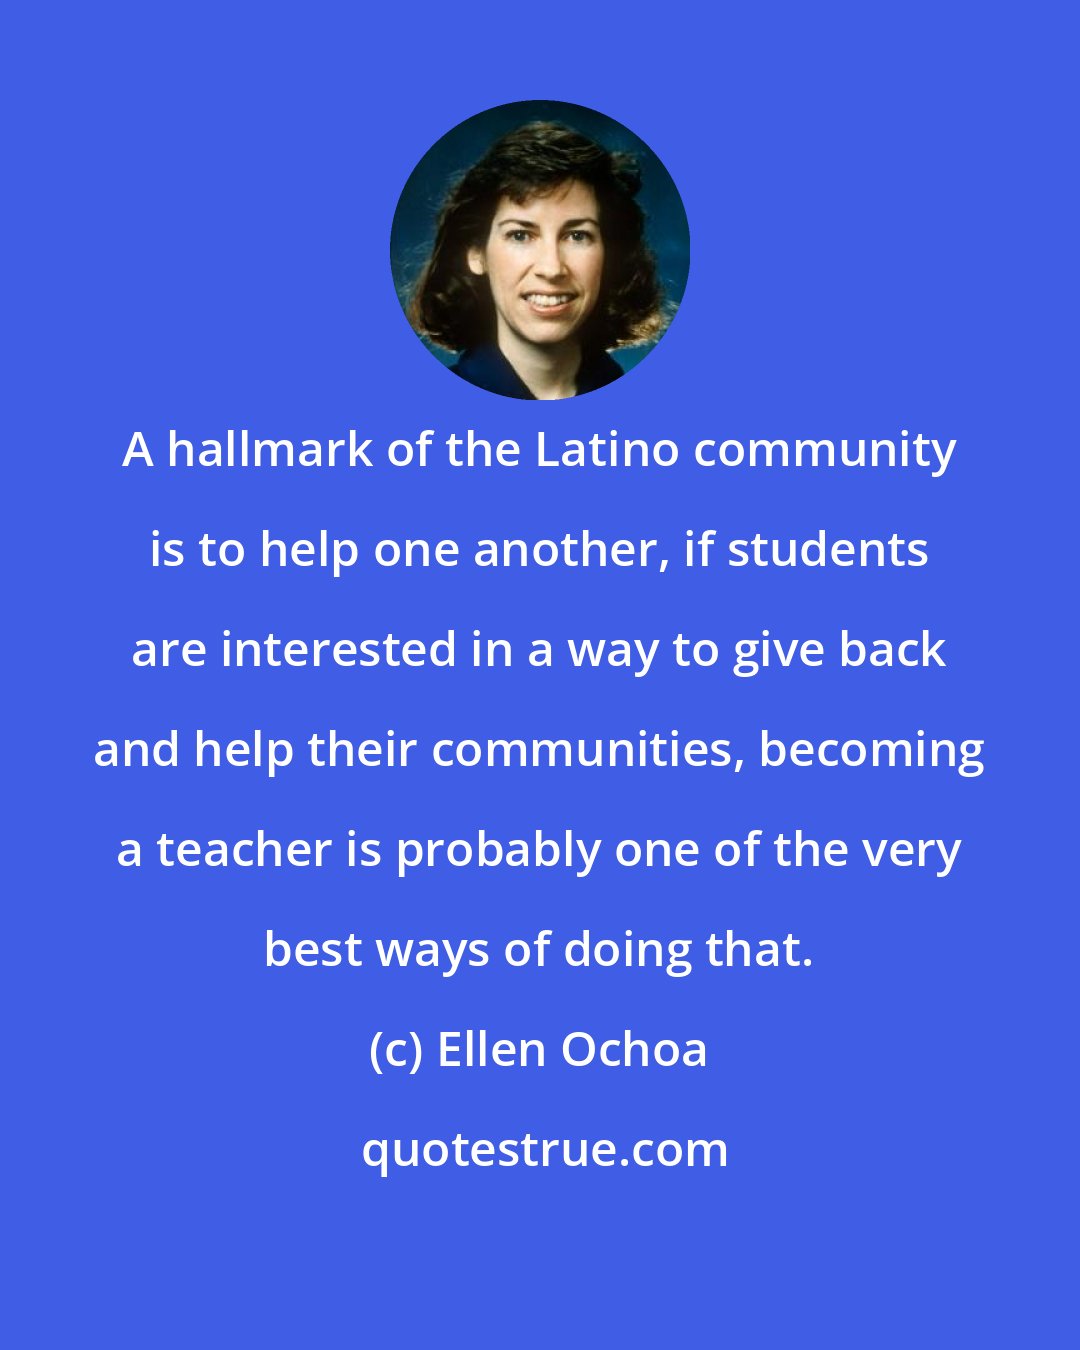 Ellen Ochoa: A hallmark of the Latino community is to help one another, if students are interested in a way to give back and help their communities, becoming a teacher is probably one of the very best ways of doing that.